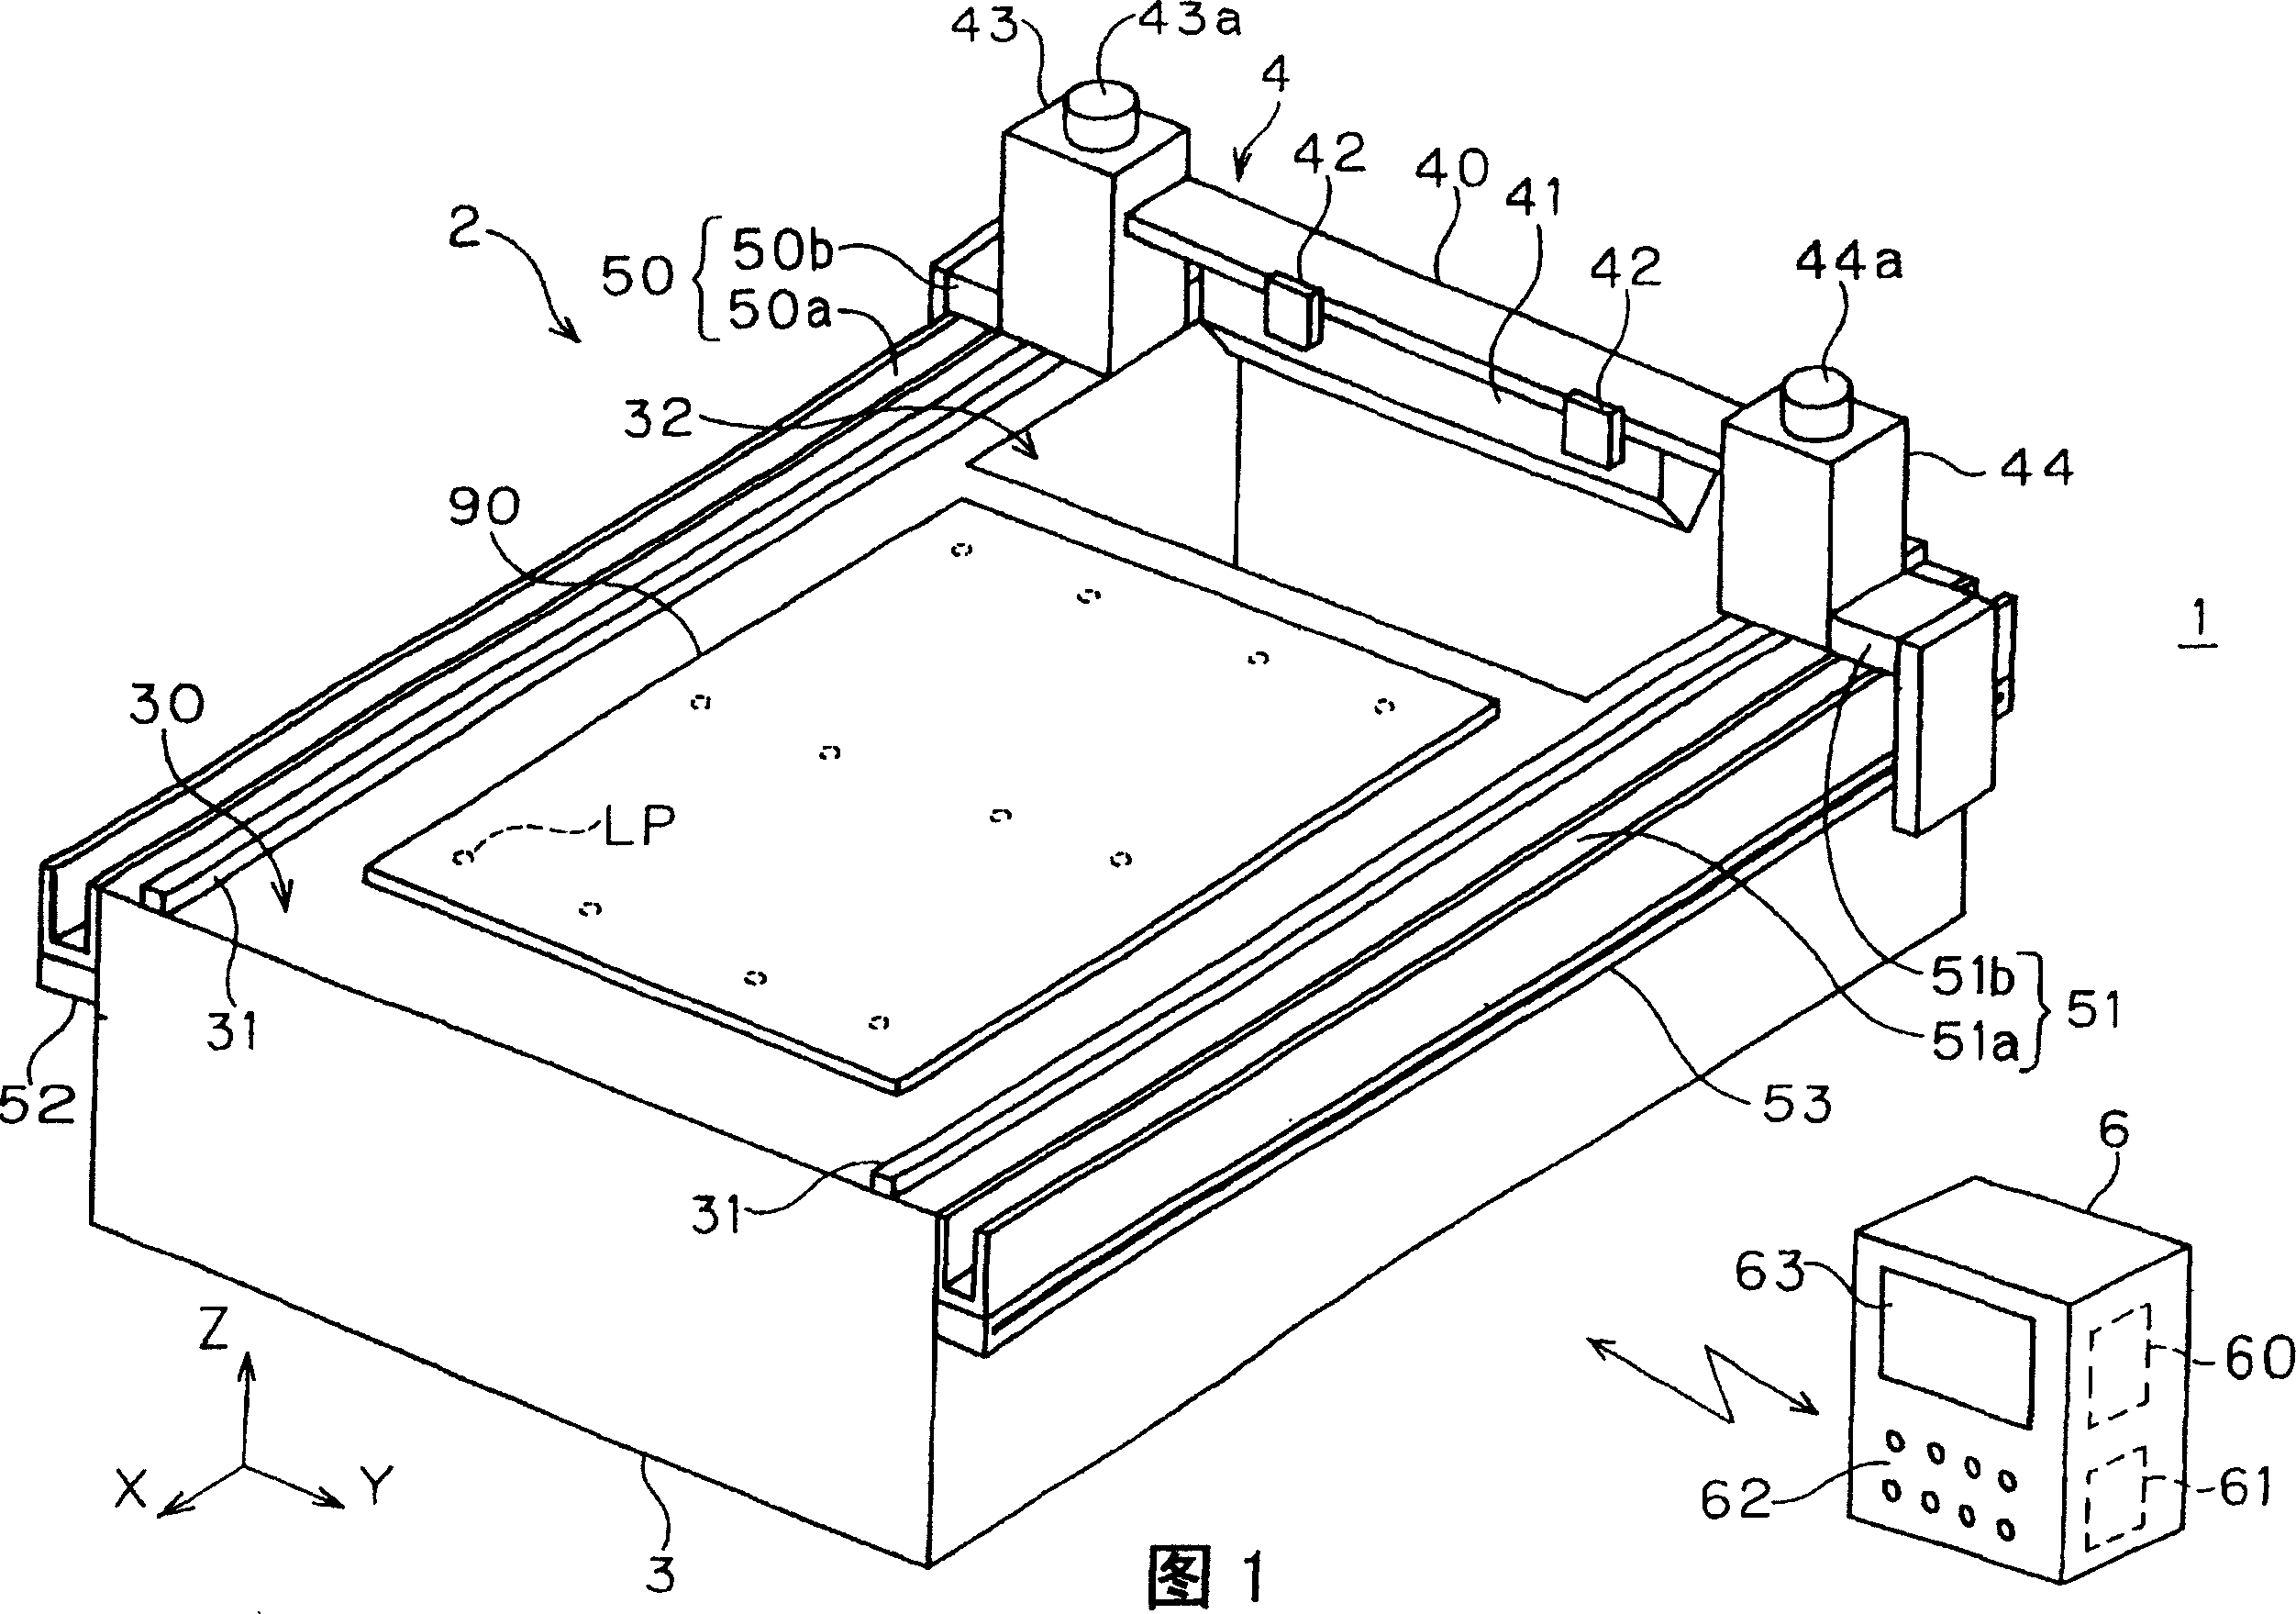 Base plate treater and slit jet nozzle